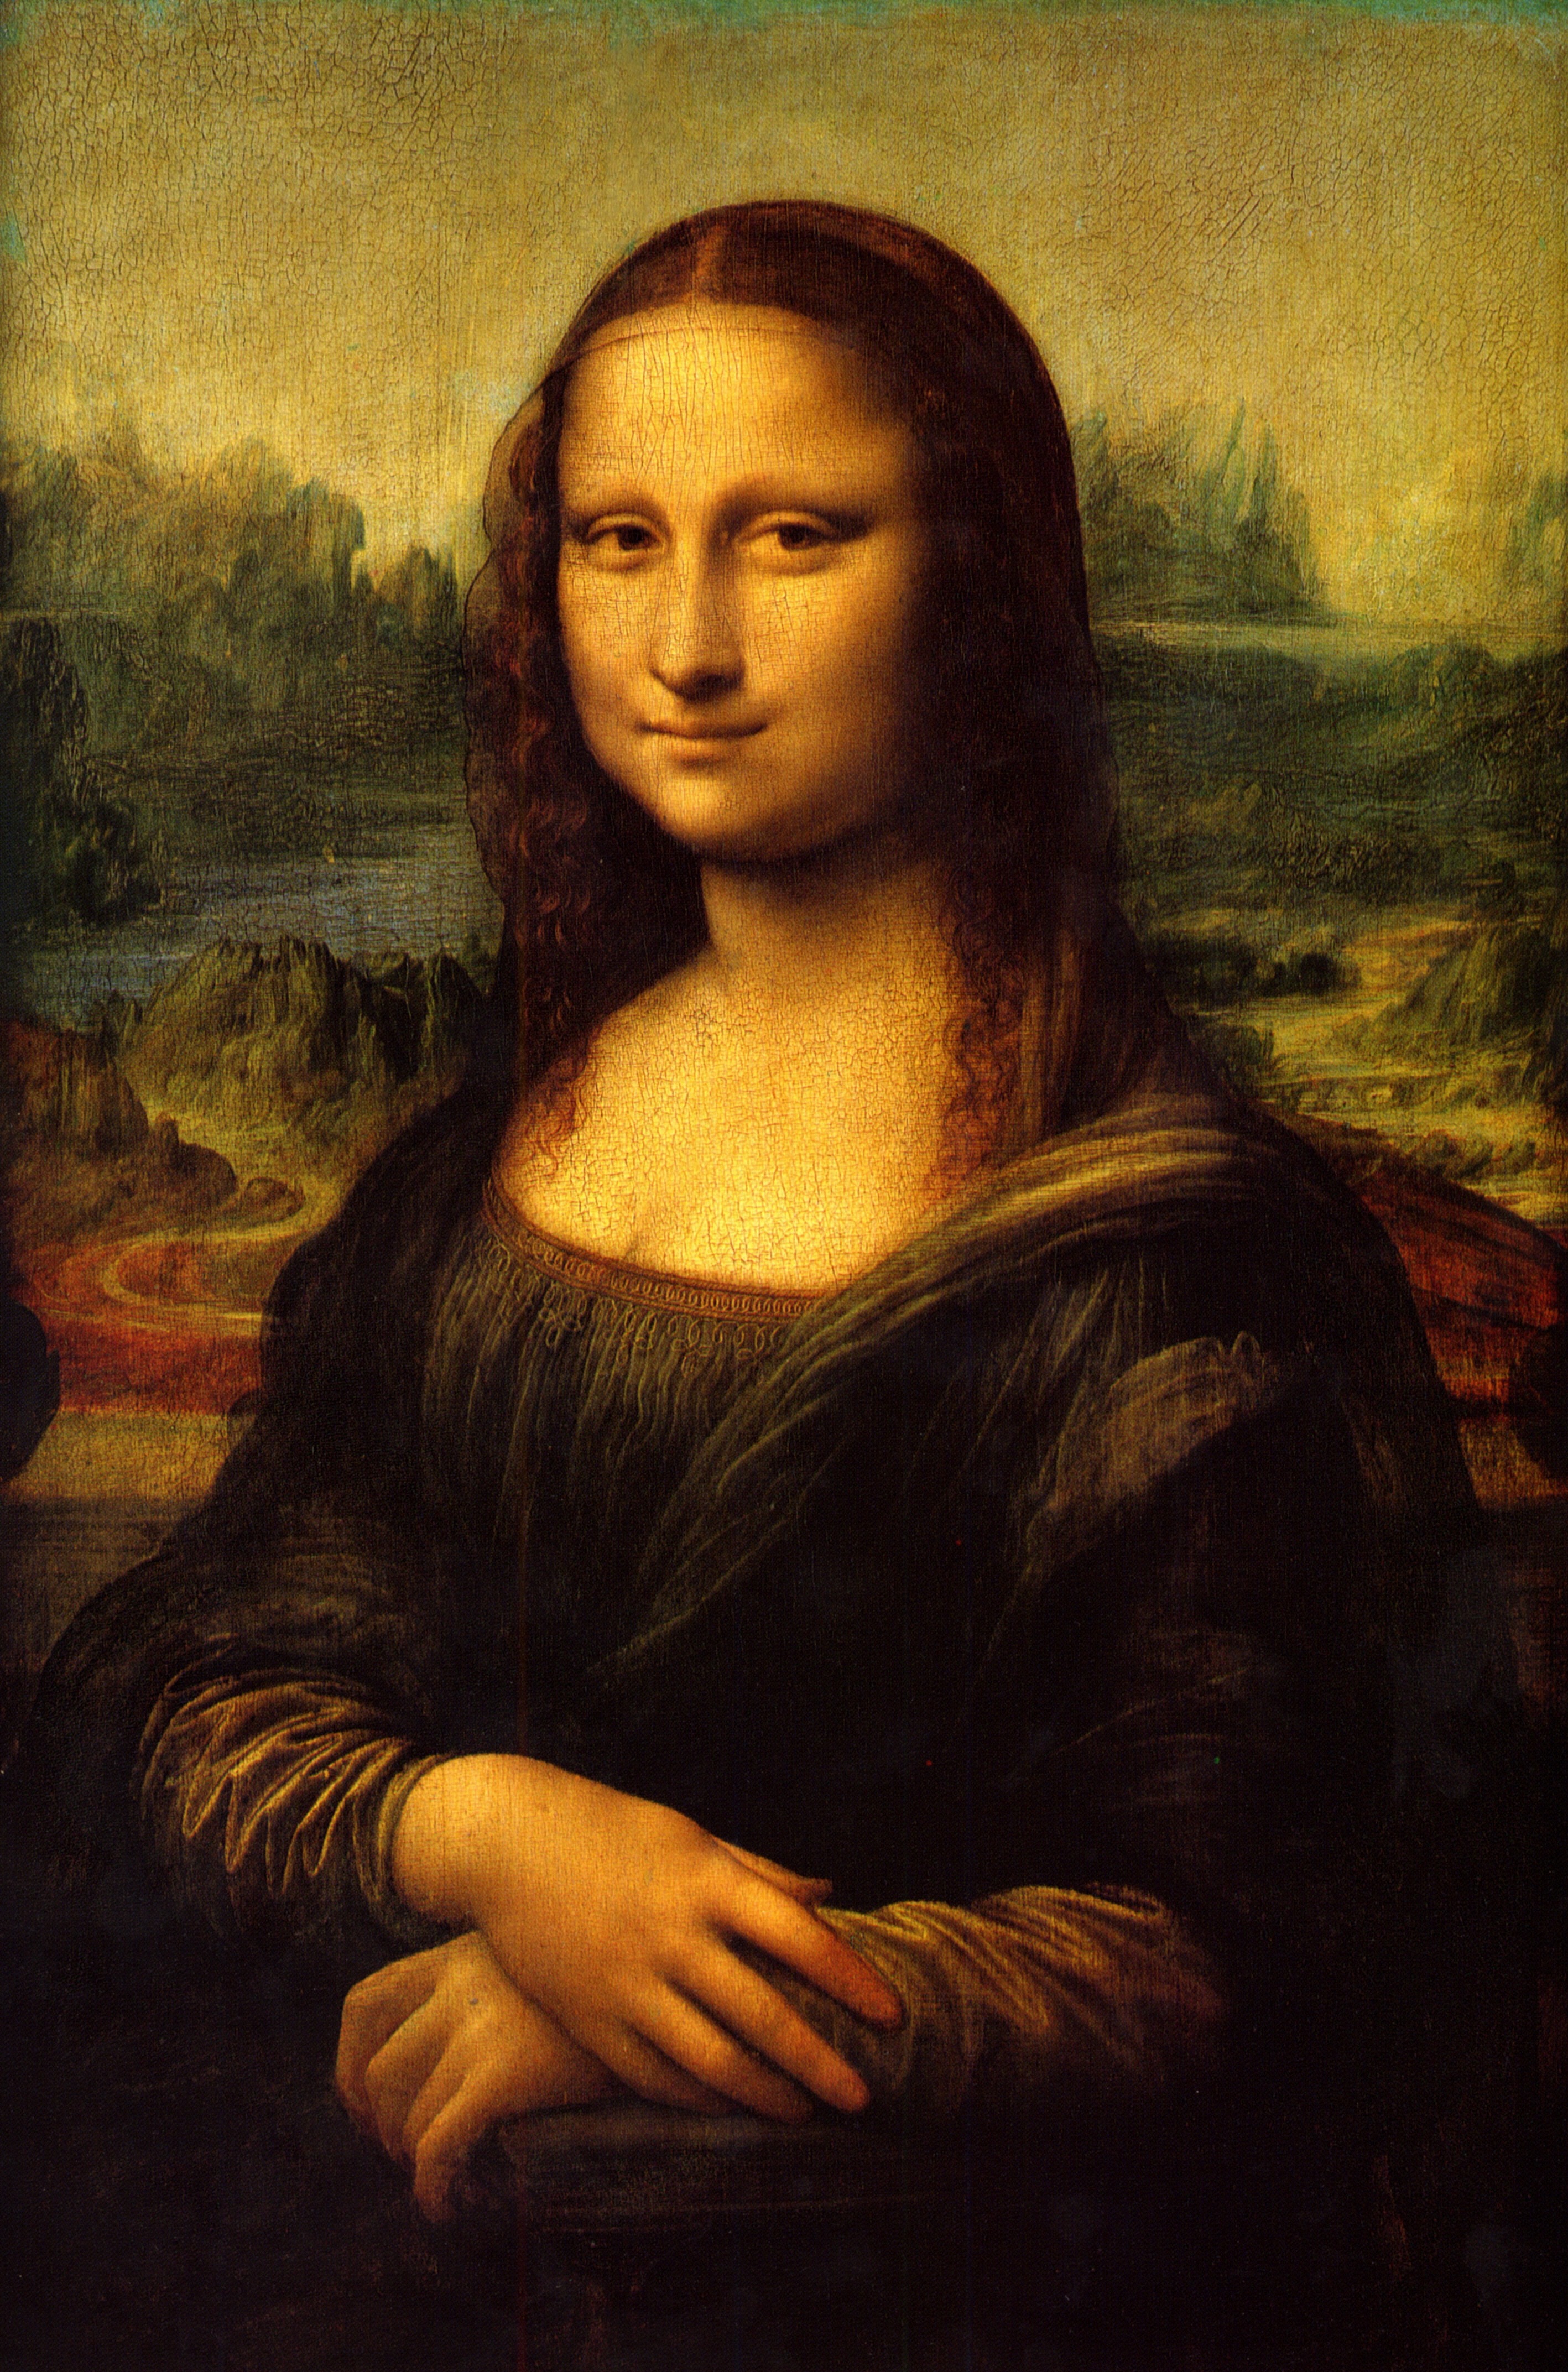 Undated photo of Leonardo da Vinci’s masterpiece, the Mona Lisa, one of the great treasures of the Louvre museum in Paris. A sophisticated cooling system helps protect the 16th-century oil on poplar wood painting from the ravages of heat. Image courtesy of Wikimedia Commons, photo credit Musee du Louvre. Wikimedia Commons regards this work as being in the public domain in the United States.